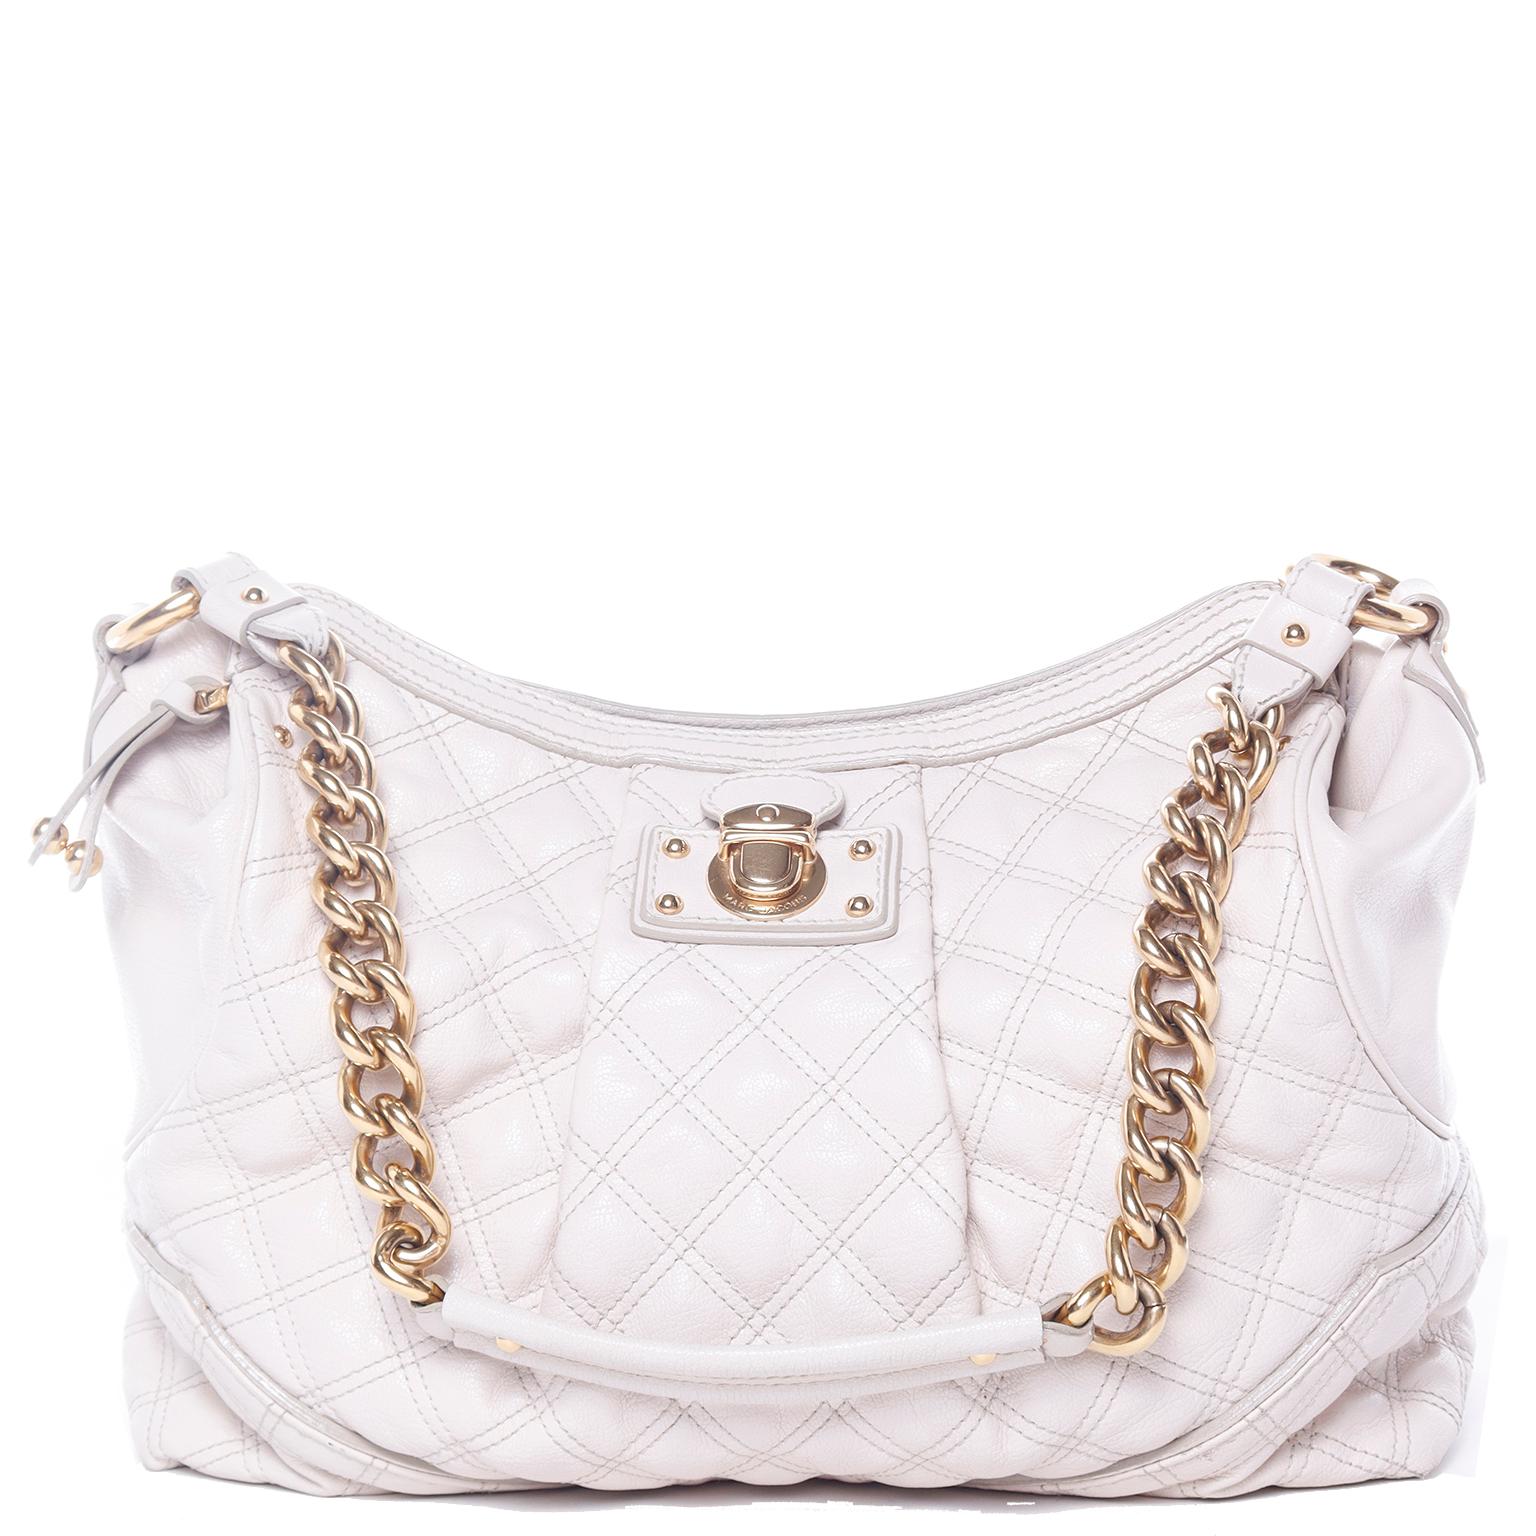 Marc Jacobs Handbag Bone Quilted Leather Zip Top Hobo Bag With Gold Chain Strap For Sale